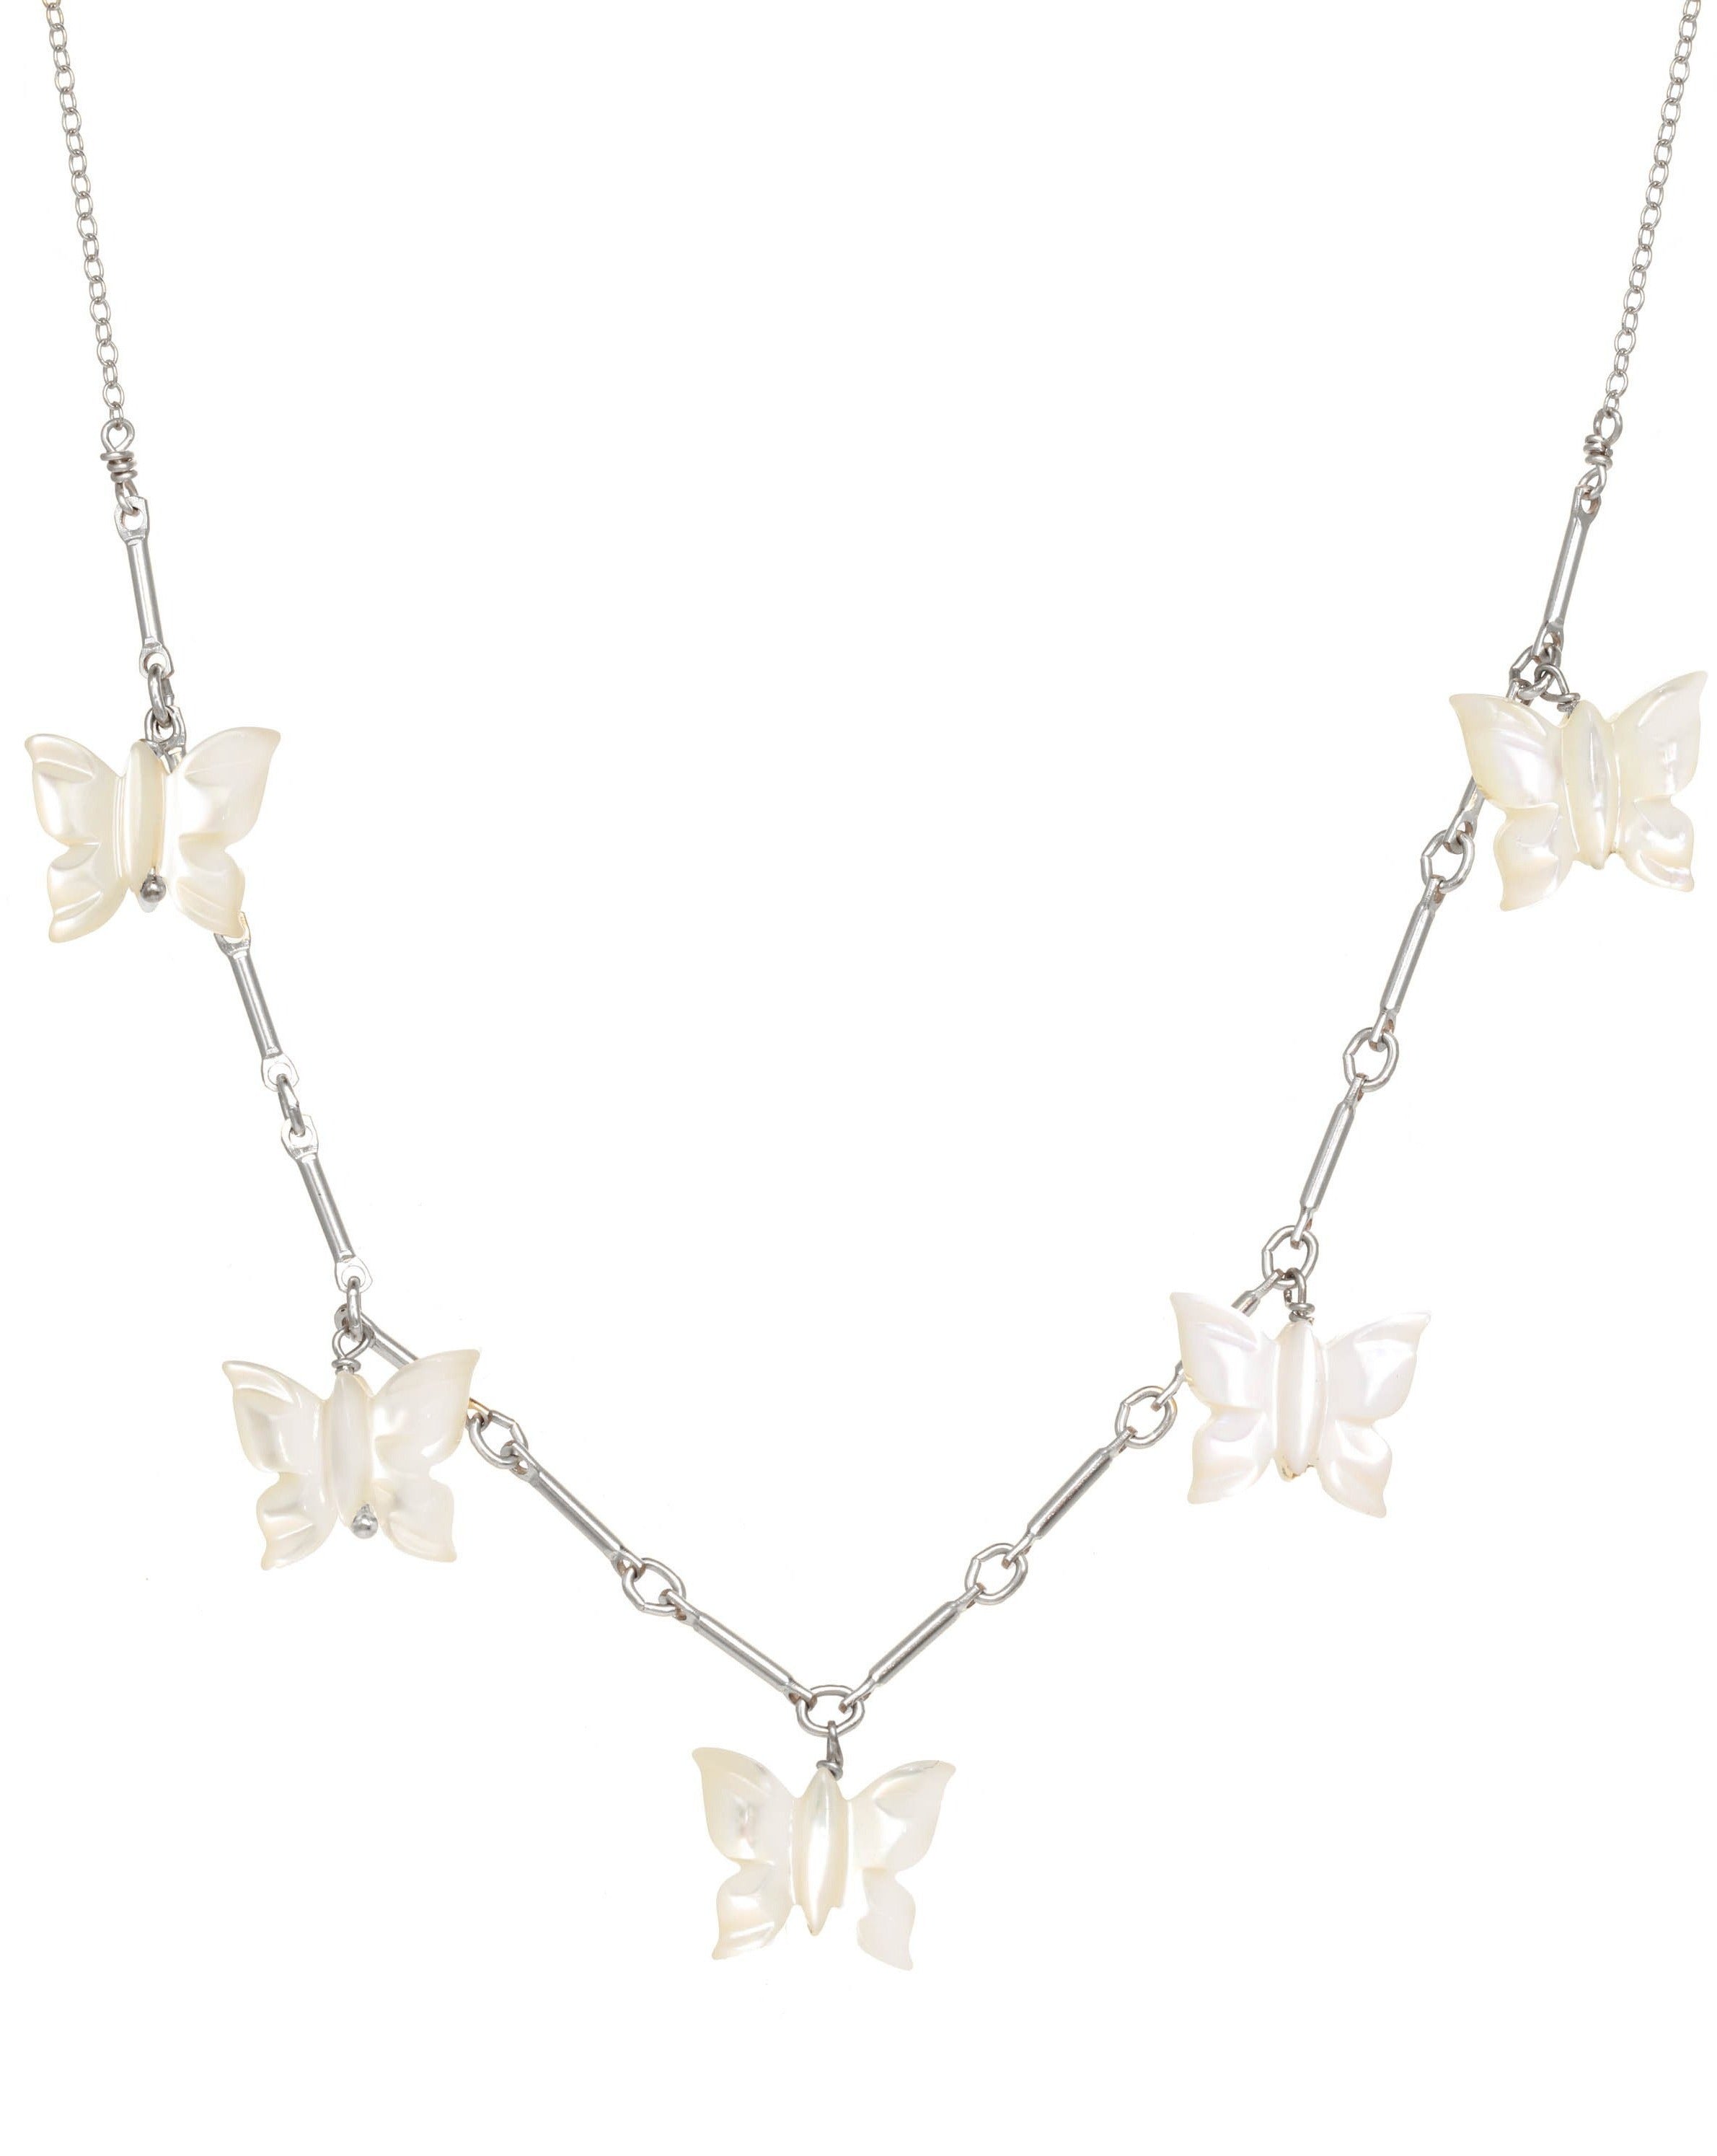 Fallon Necklace by KOZAKH. A 16 to 18 inch adjustable length, bar link chain necklace in Sterling Silver, featuring hand-carved Mother of Pearl butterfly charms. 